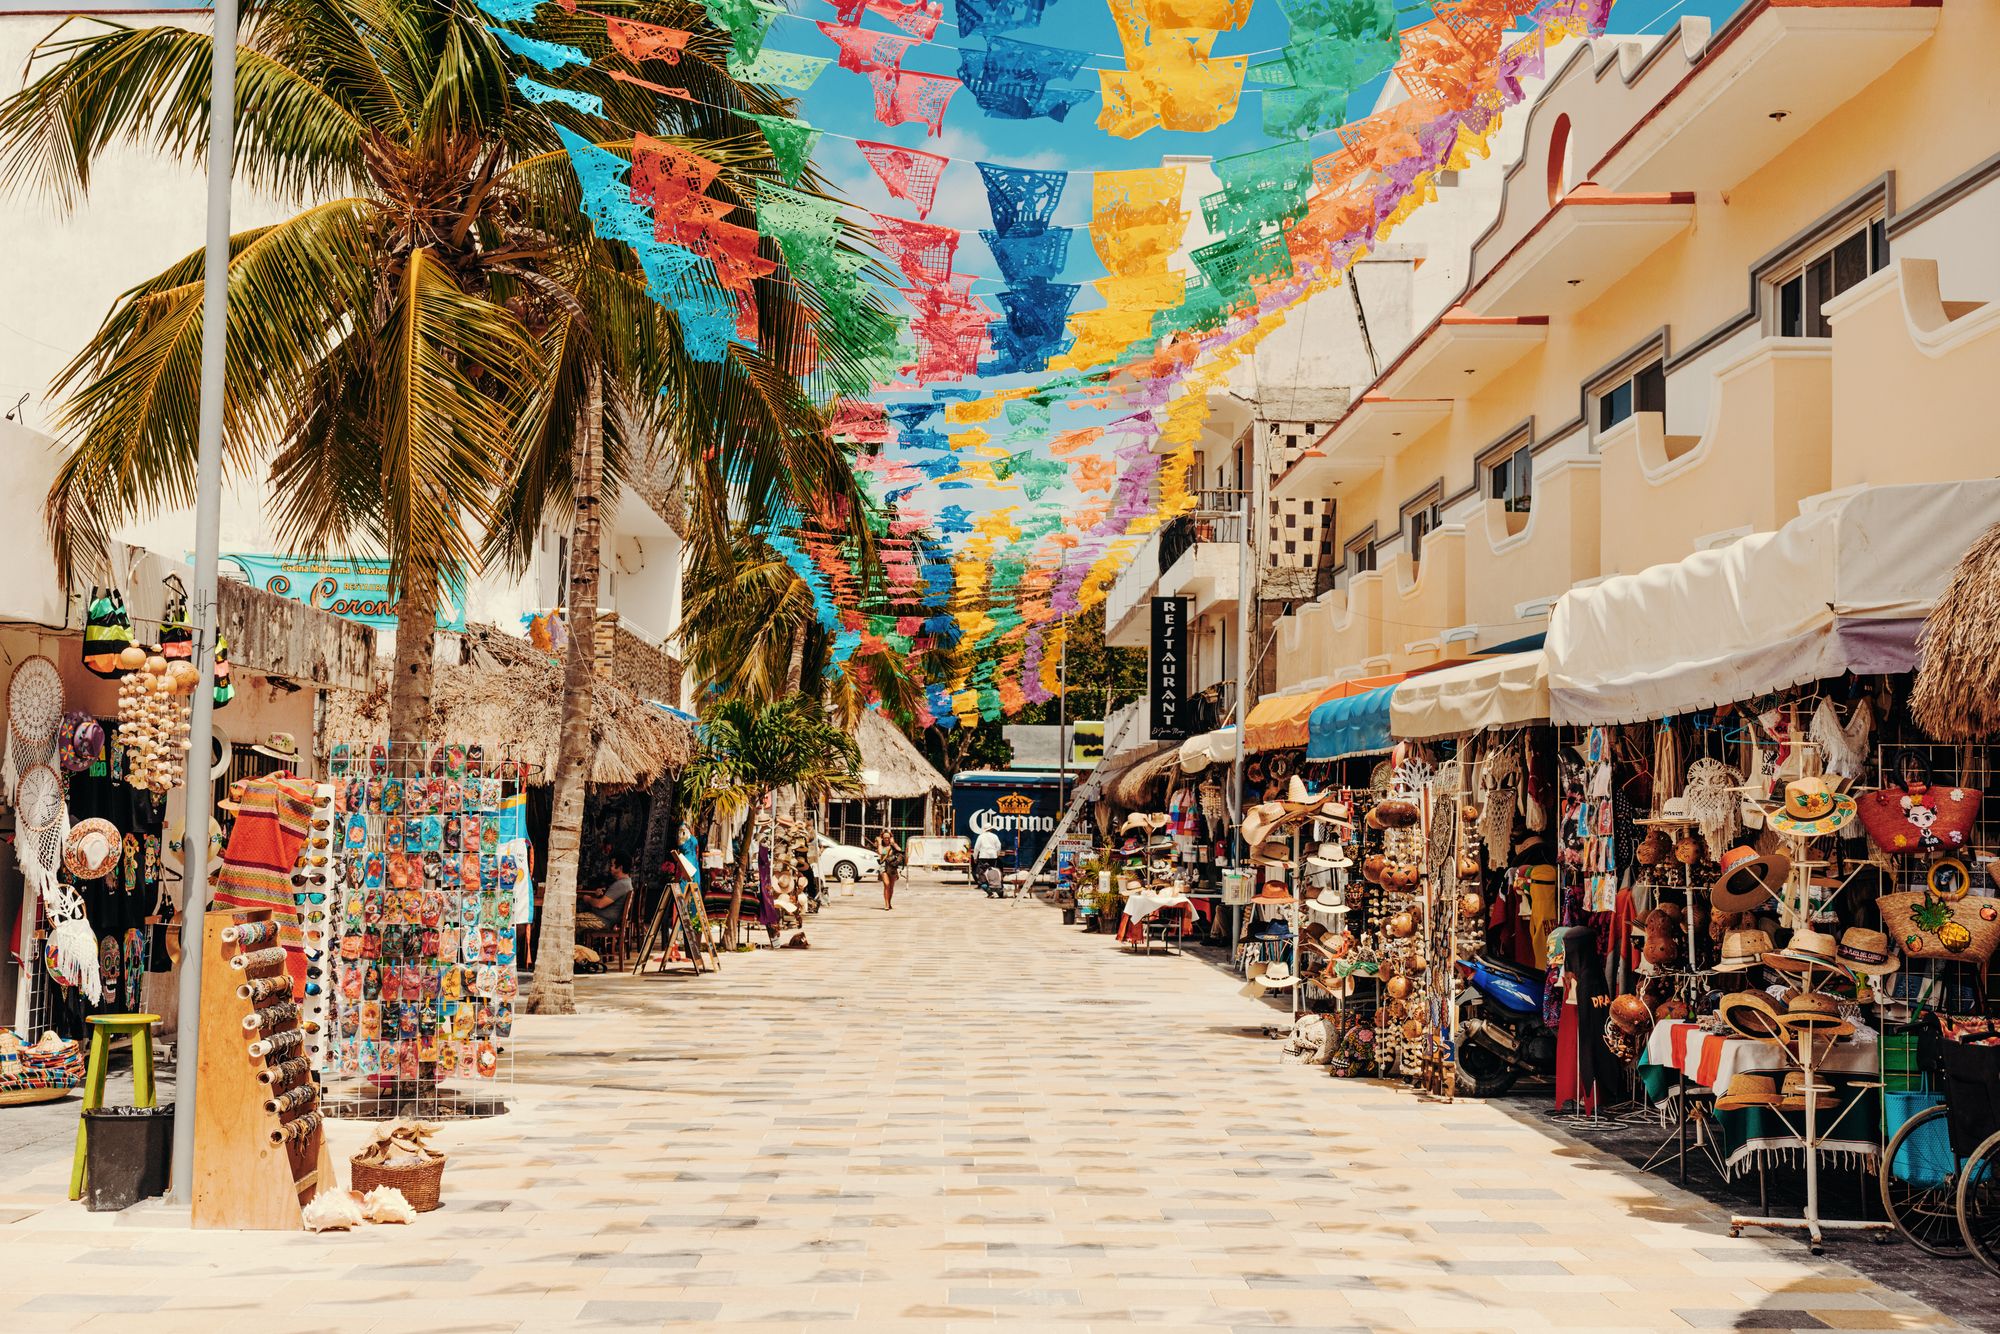 Many of the quaint markets in Cancun are fully accessible to wheelchair users